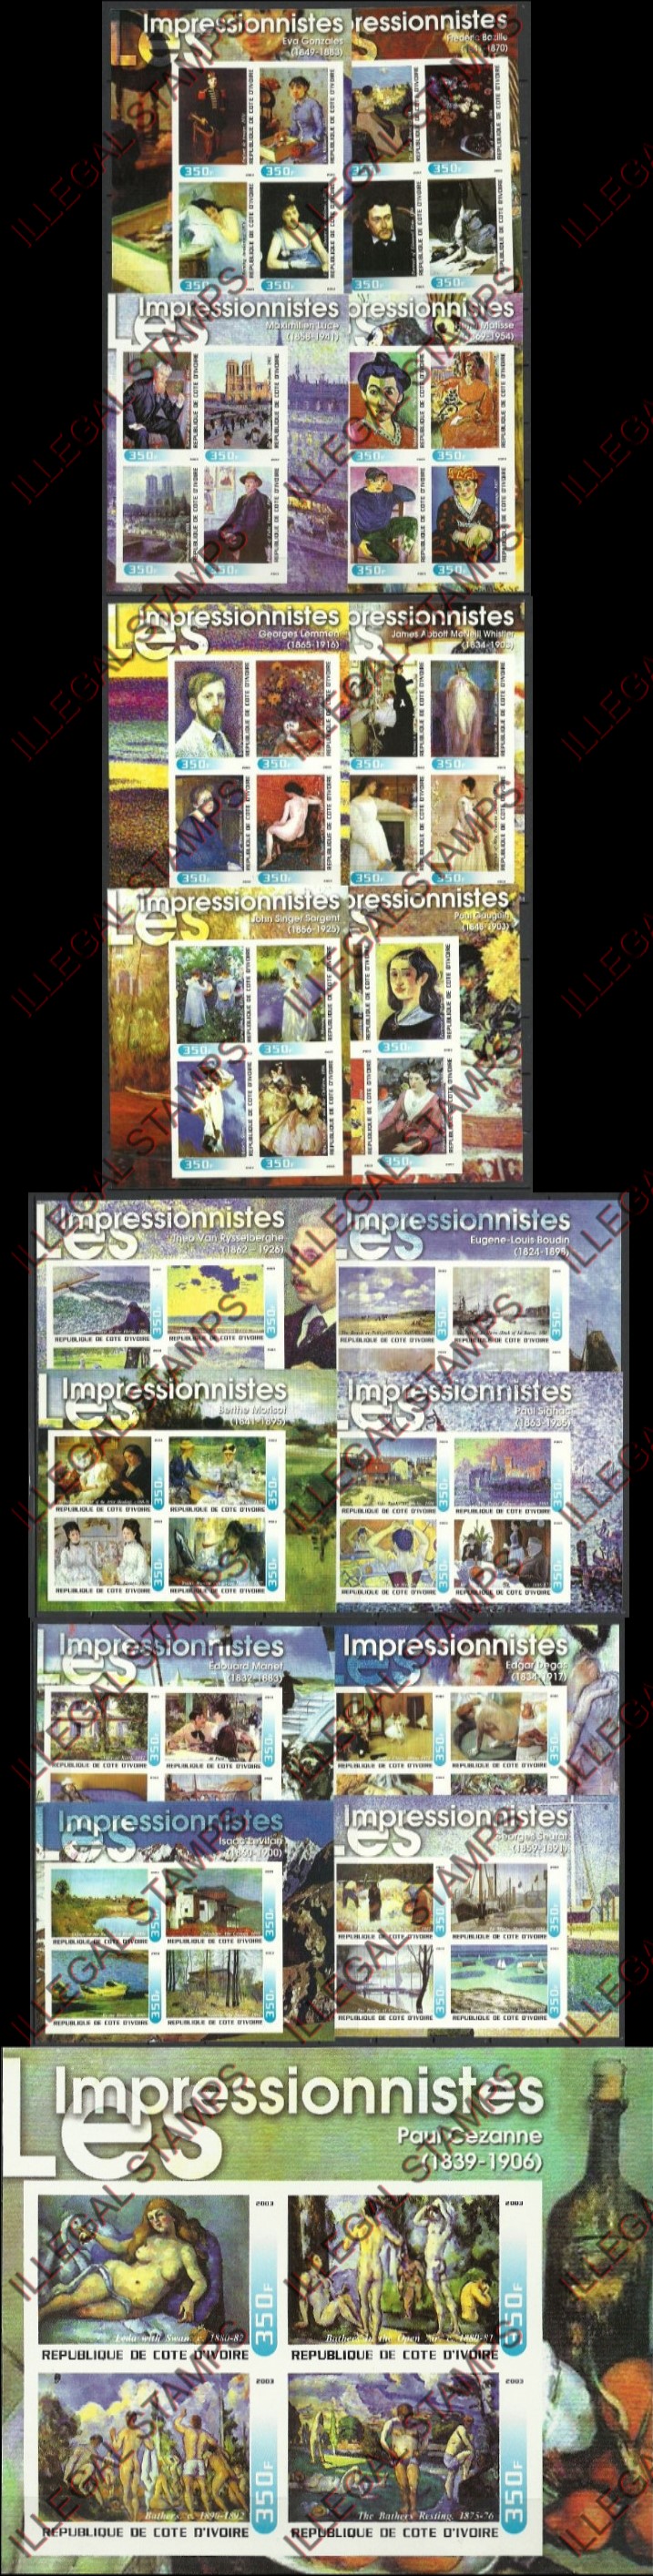 Ivory Coast 2003 Impressionists Paintings Illegal Stamp Souvenir Sheets of 4